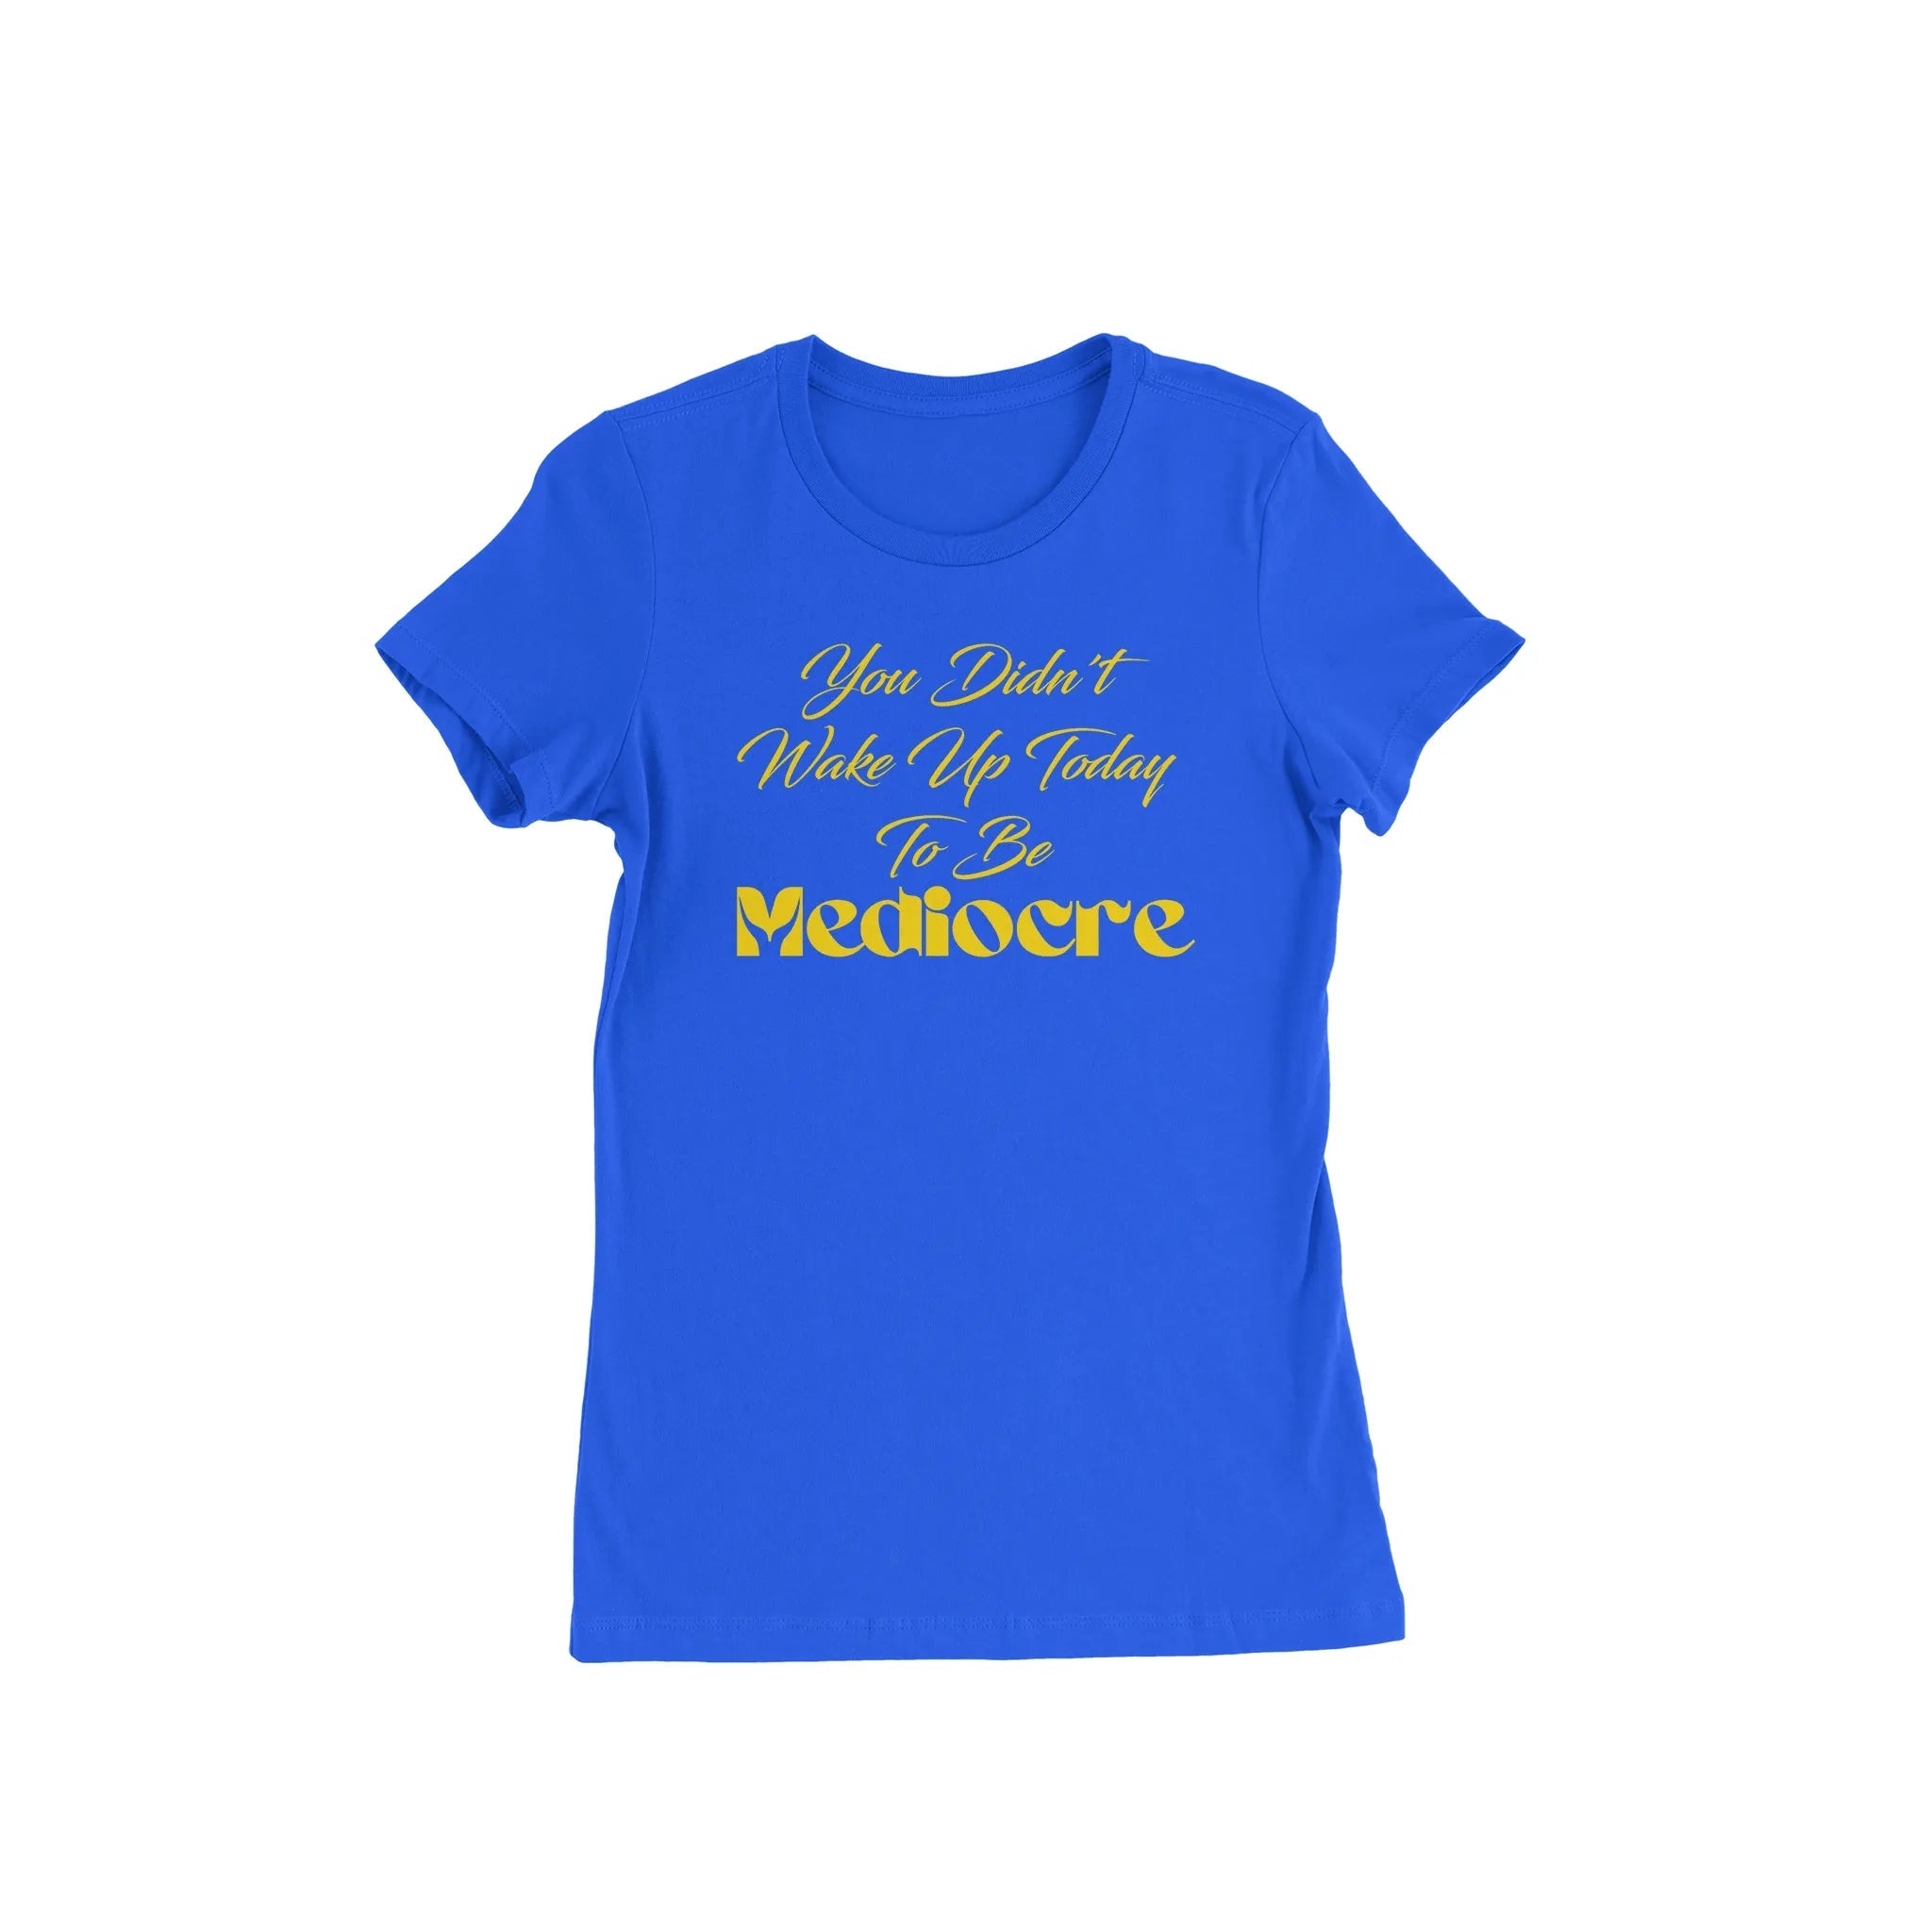 You Didn't Wake Up to be Mediocre Blue T - Shirt - Diva Starr Boutique